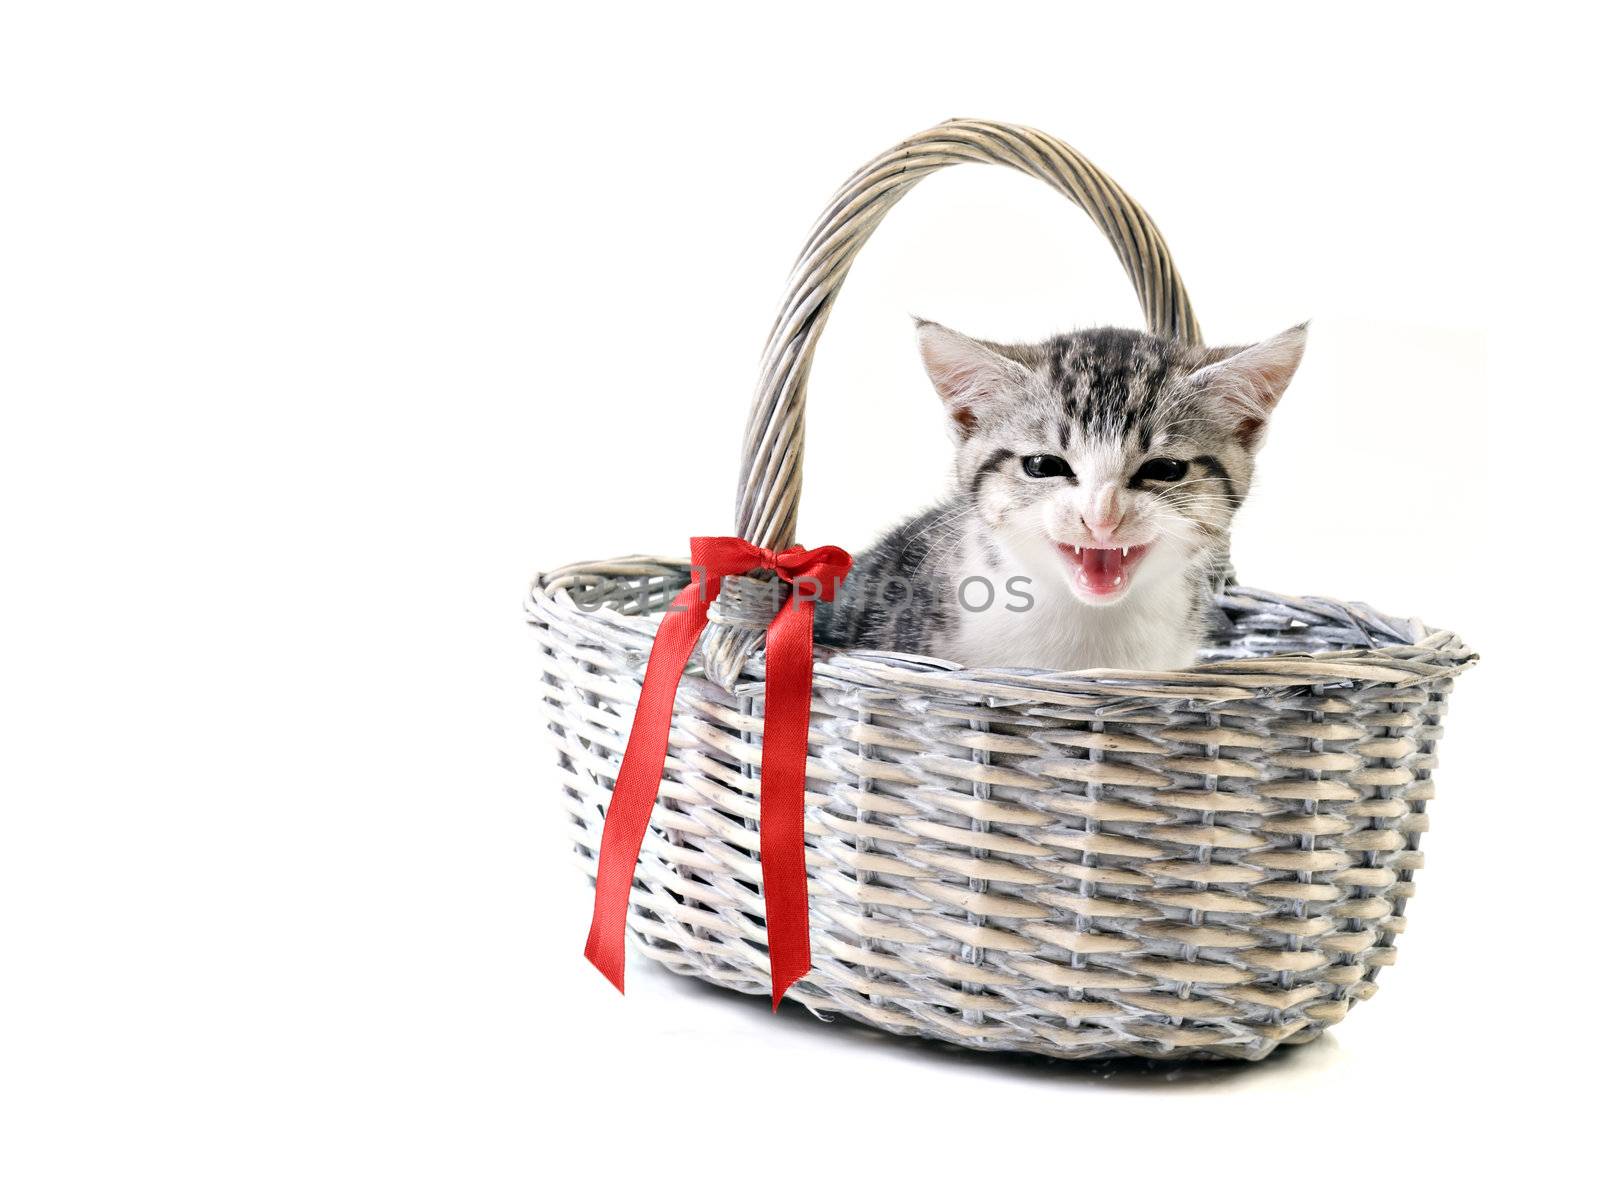 Adorable little kitten on white background with space for text